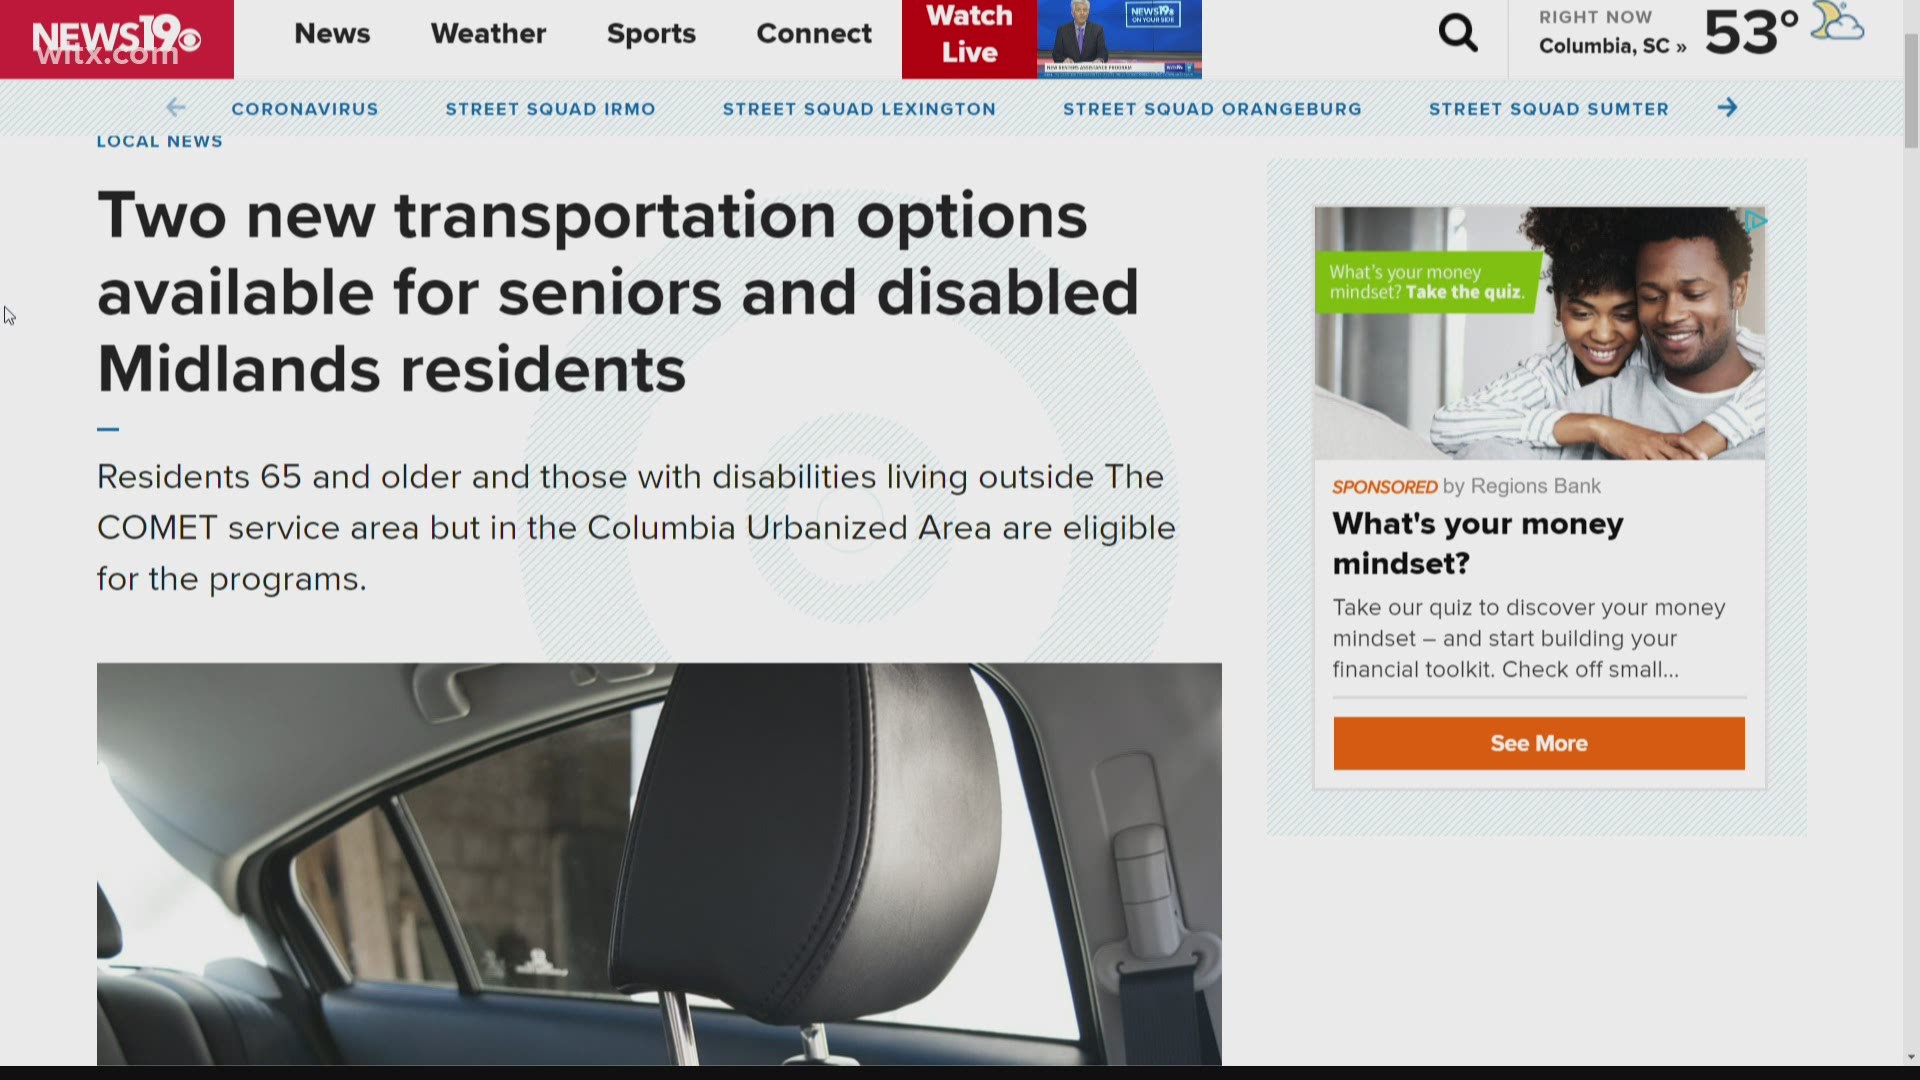 Residents 65 and older and those with disabilities living outside The COMET service area but in the Columbia Urbanized Area are eligible for the programs.